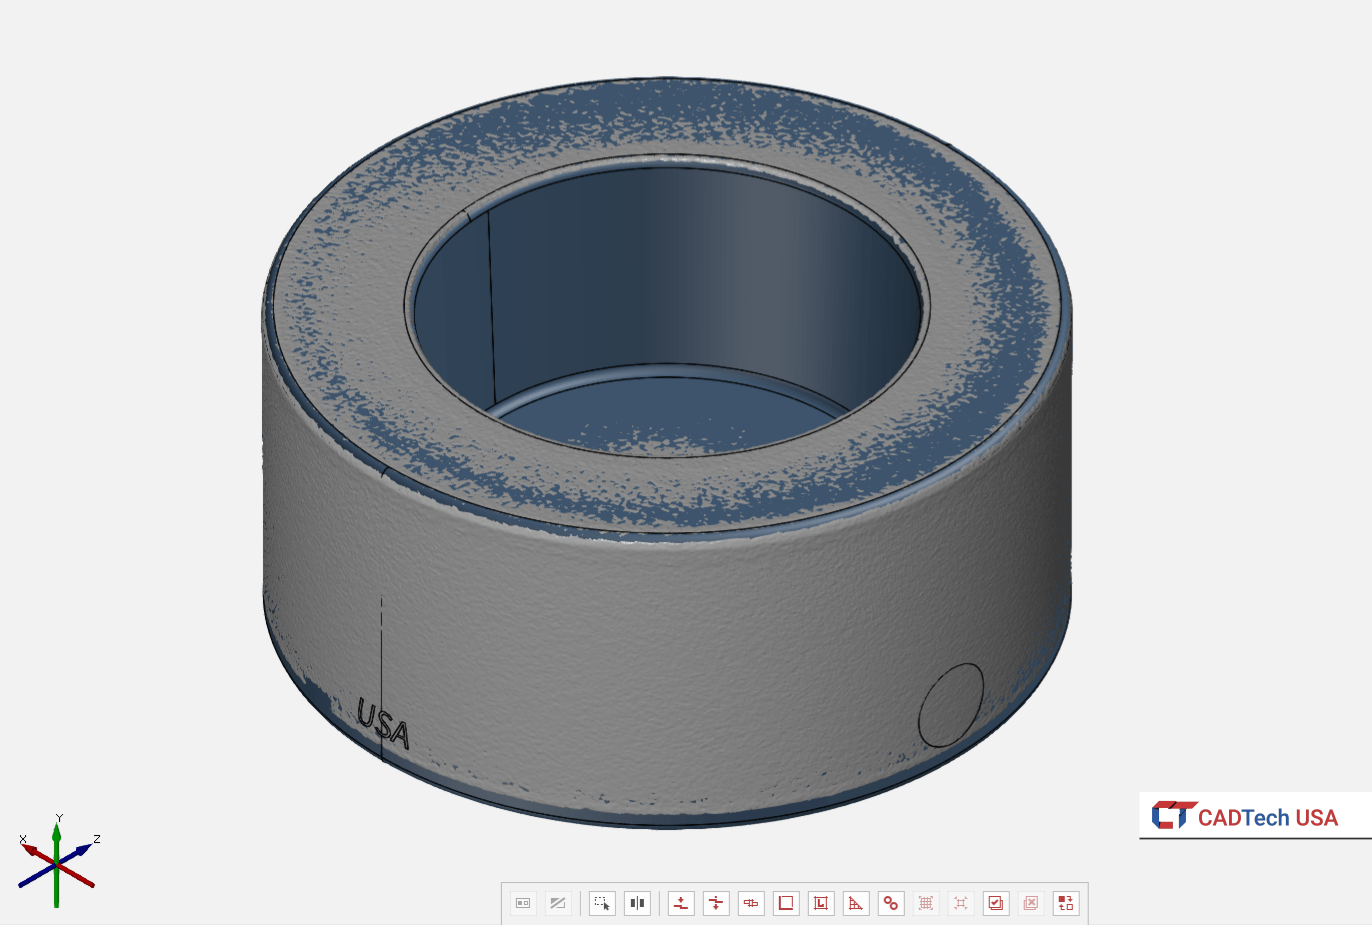 Scanned mesh imported into Solidworks for reverse engineering